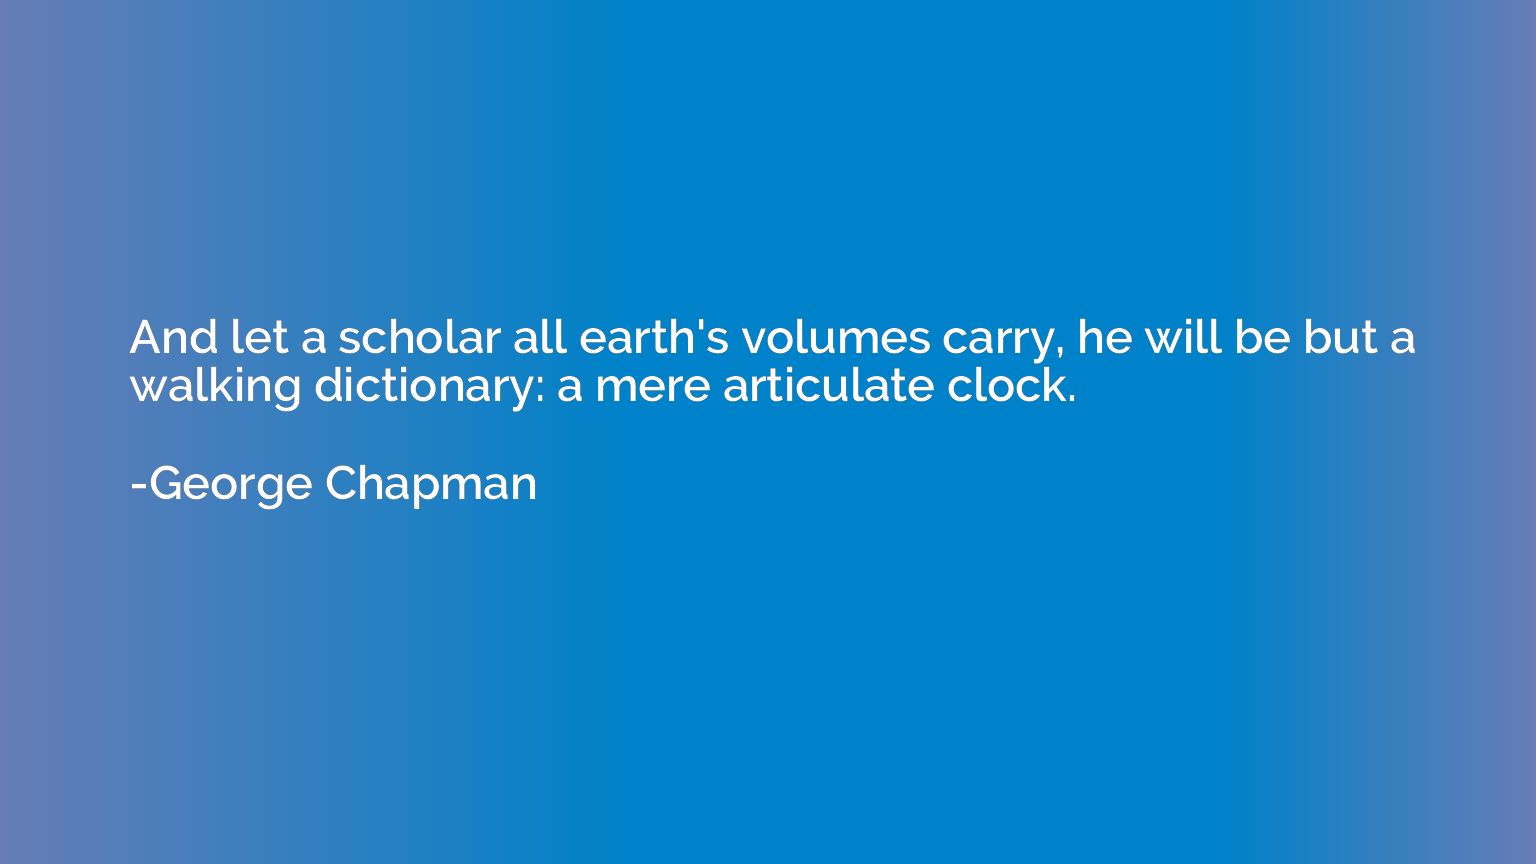 And let a scholar all earth's volumes carry, he will be but 